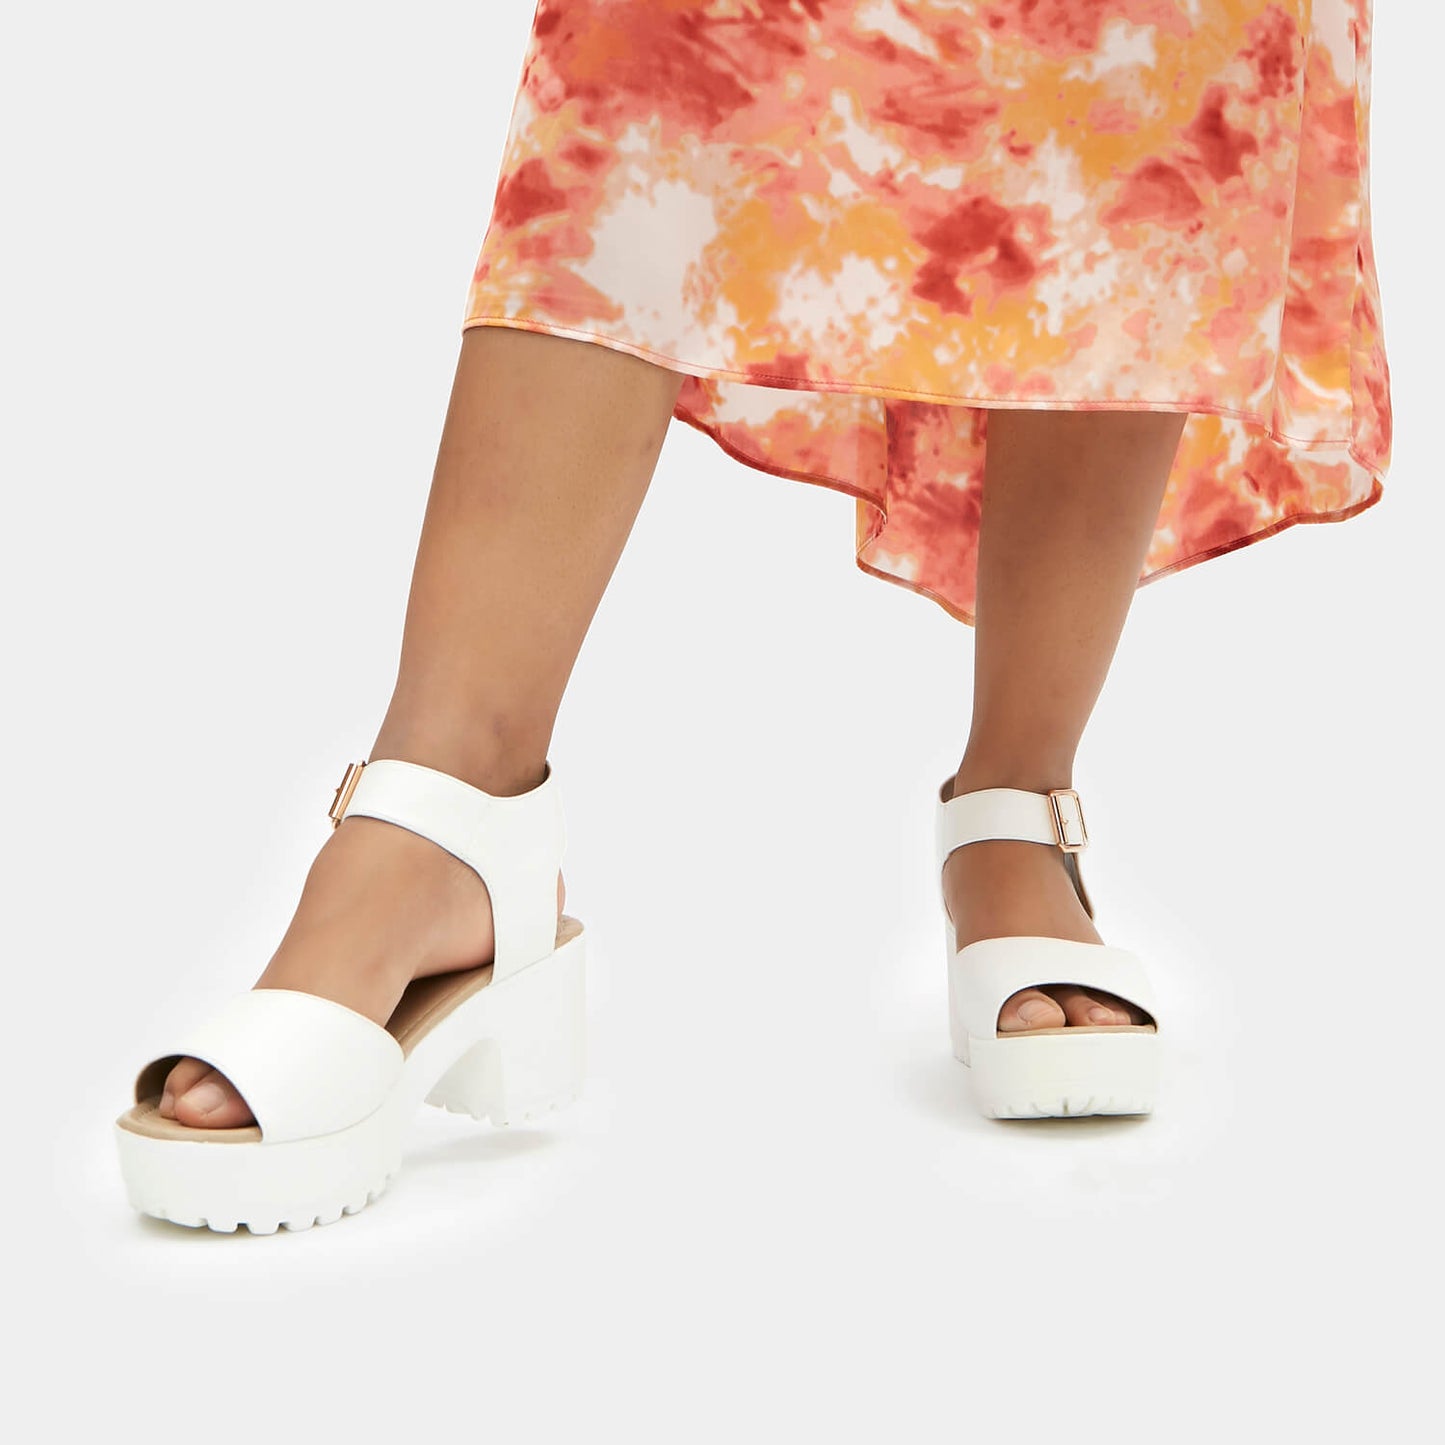 LOR White Chunky Sandals - Sandals - KOI Footwear - White - Model Front View